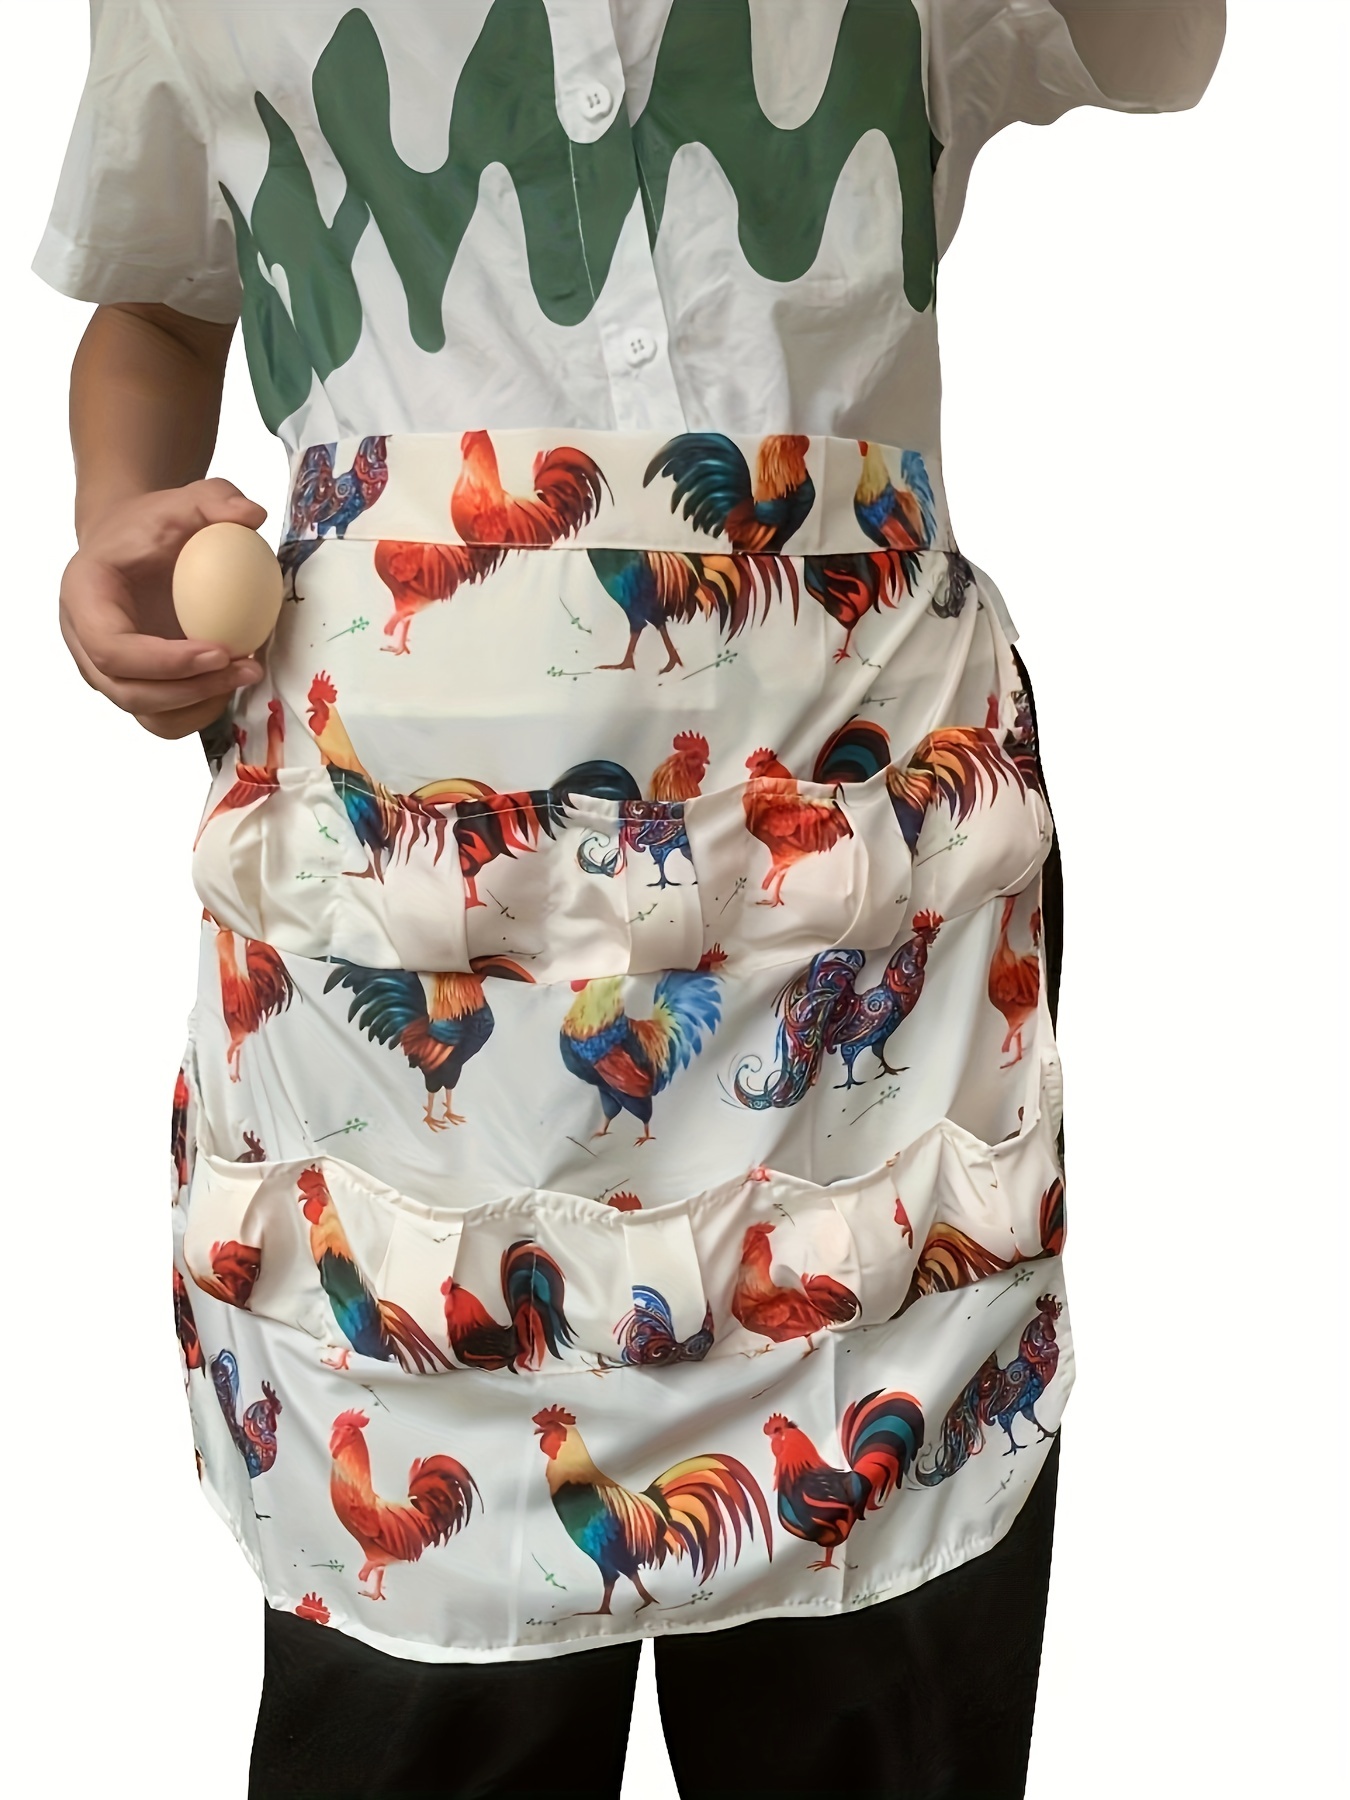  Egg Apron For Collecting Eggs, Egg Collecting Apron With 12  Pockets-Stylish Apron For Fresh Egg Collection. (Color : Colorful-A) : Home  & Kitchen